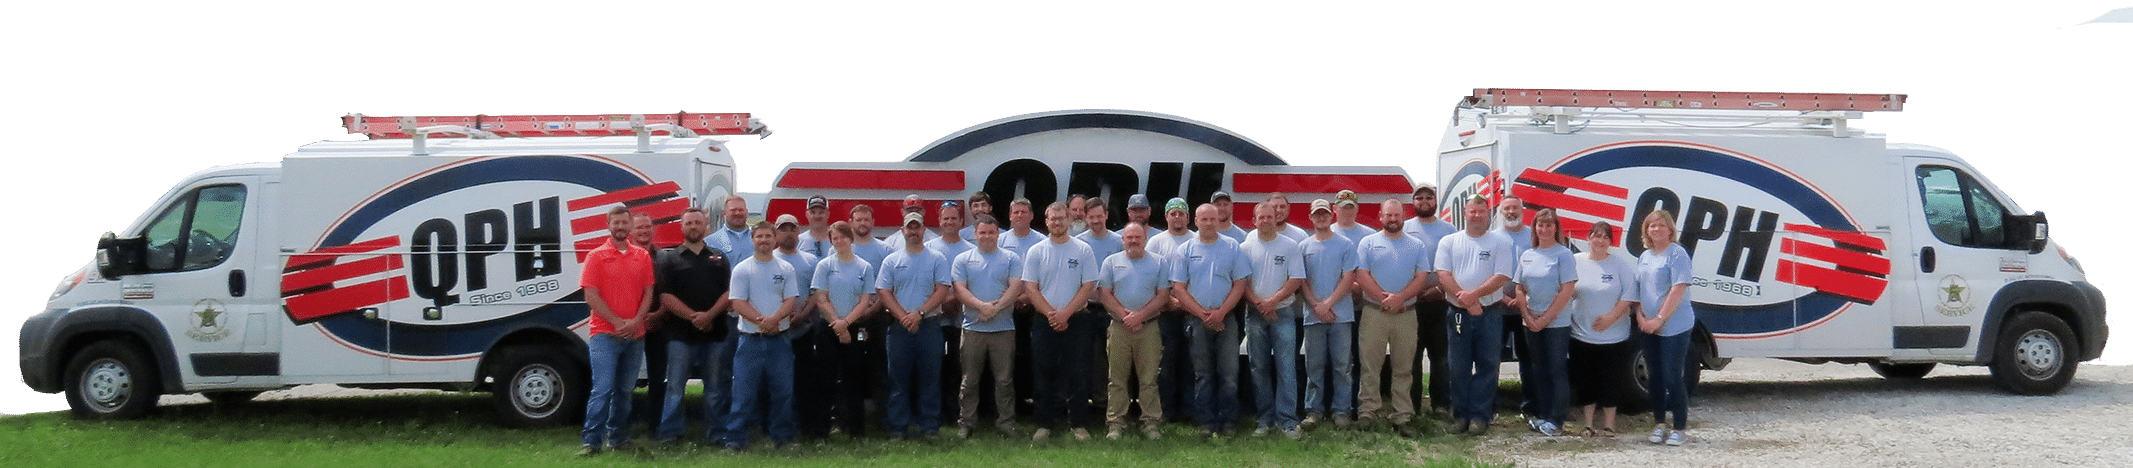 About Indianapolis QPH Team Photo